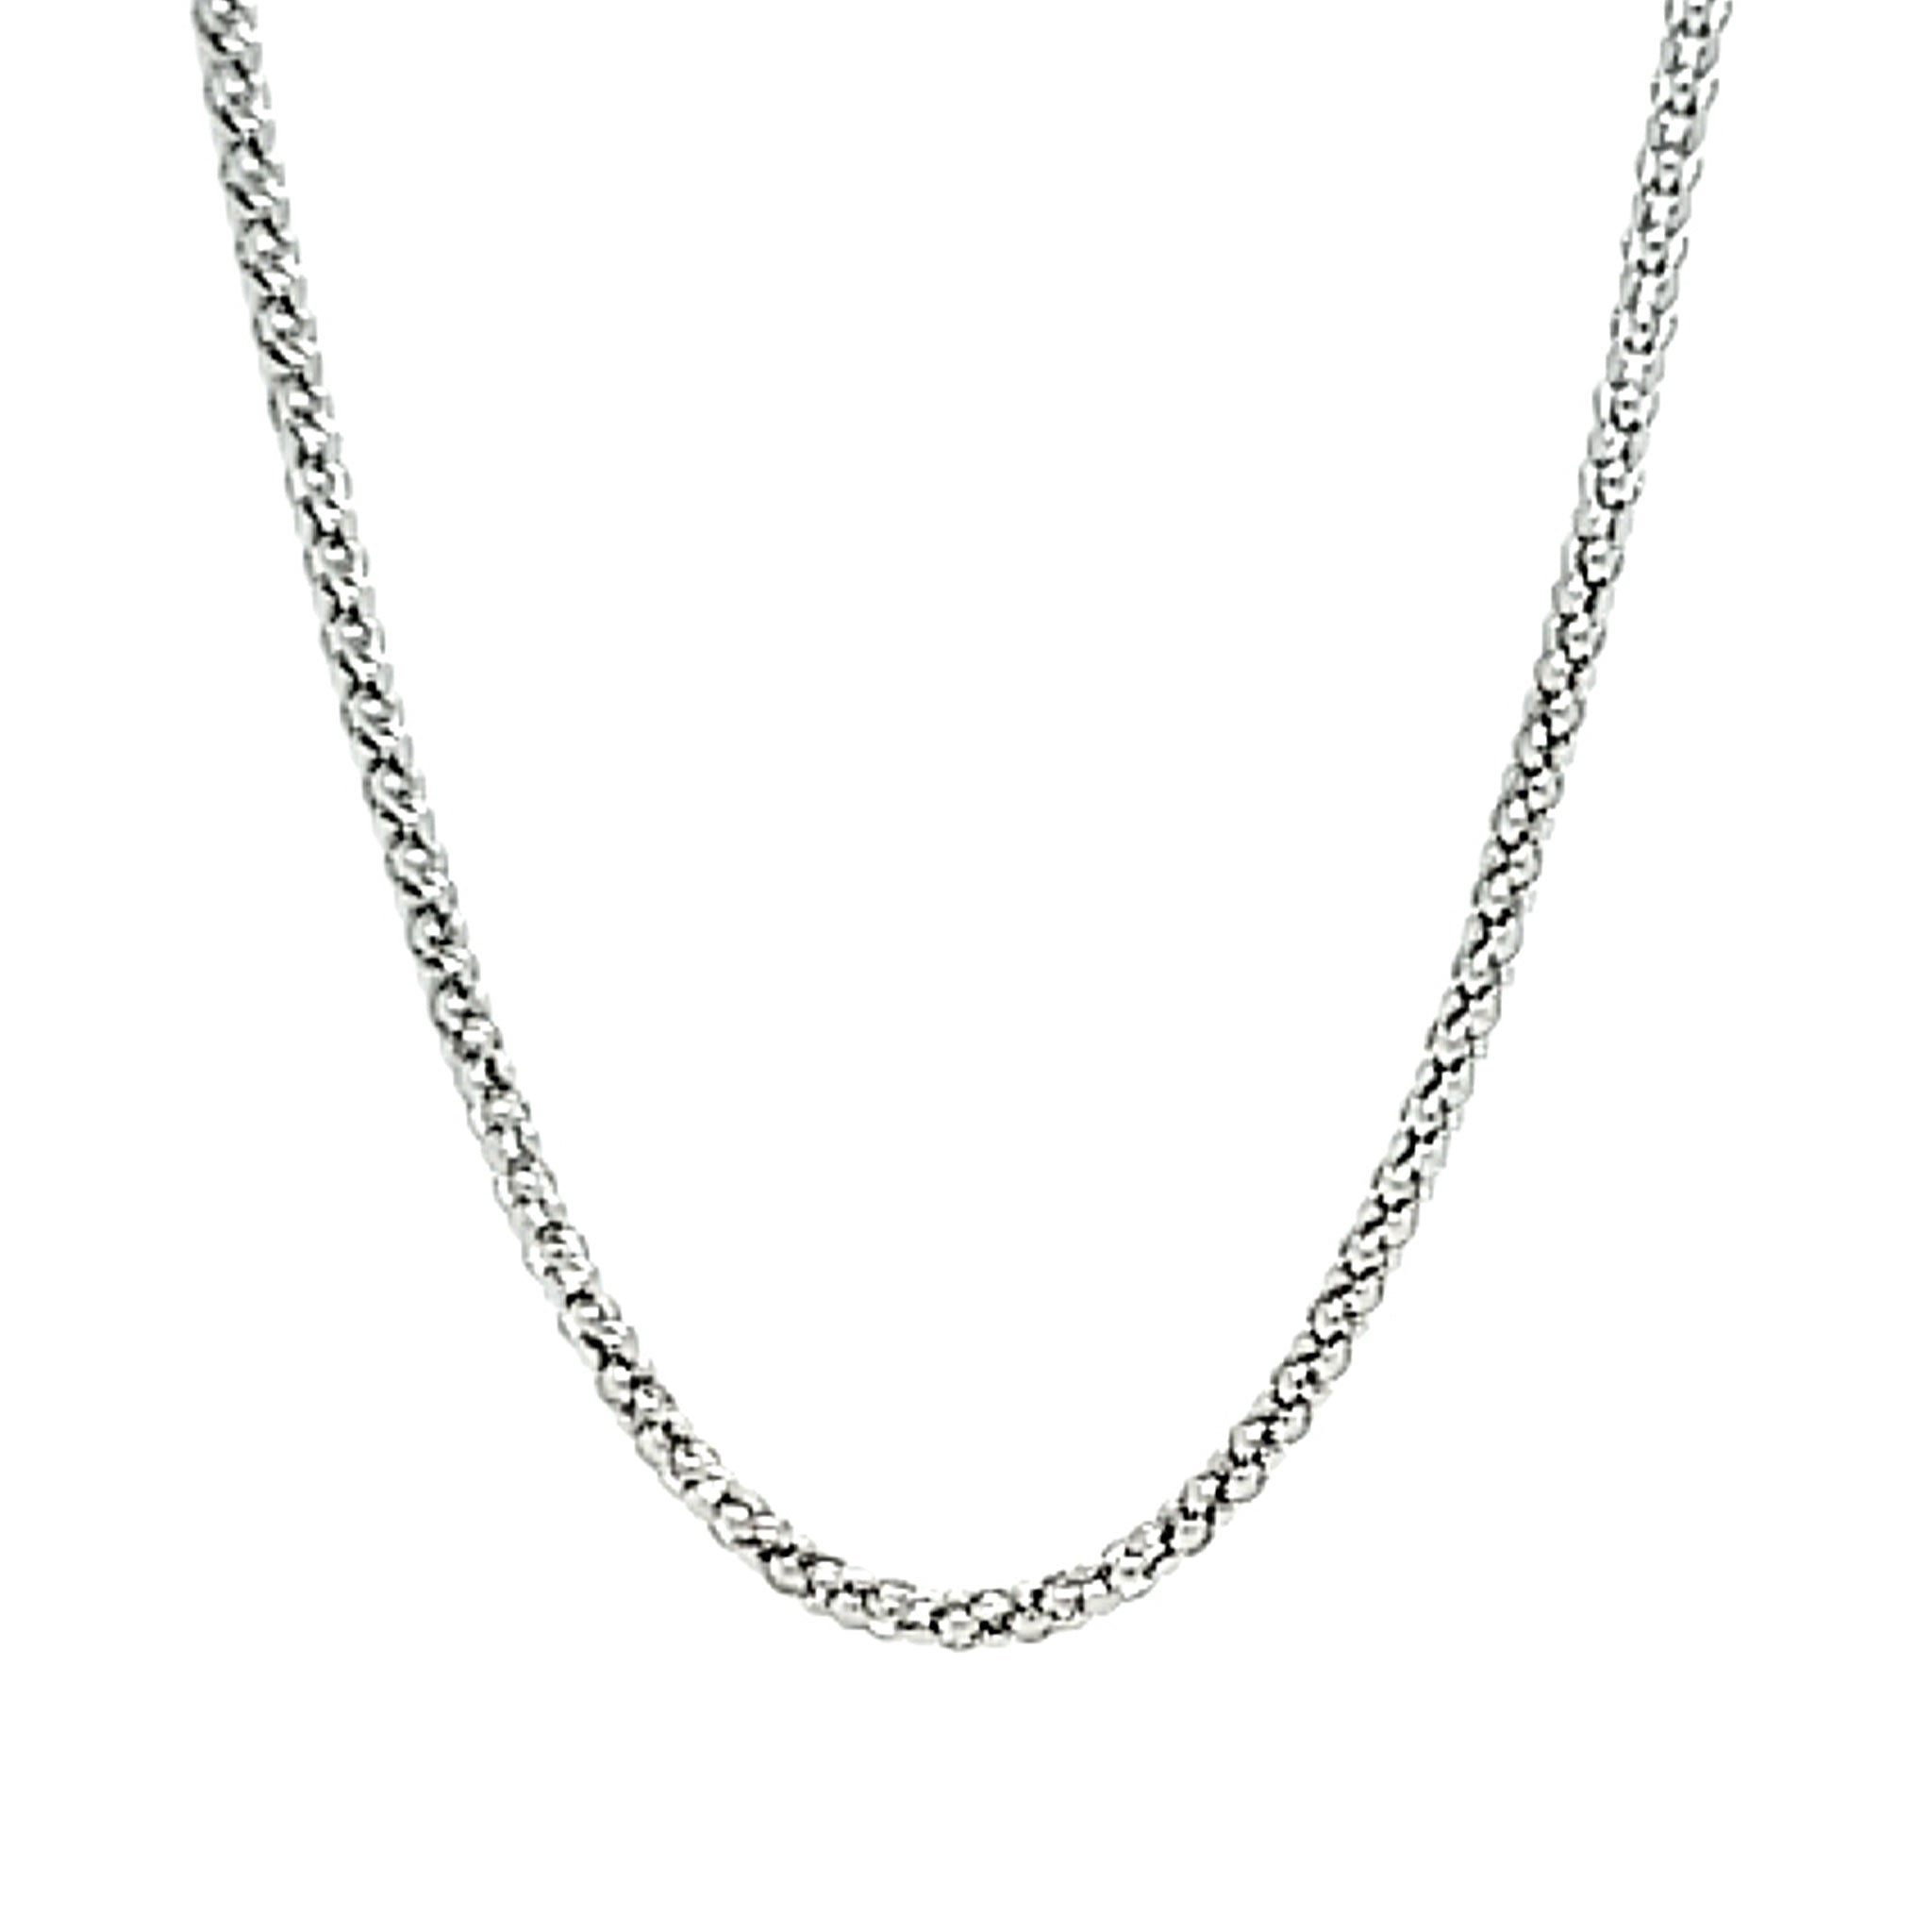 Stainless steel popcorn chain necklace hanging.